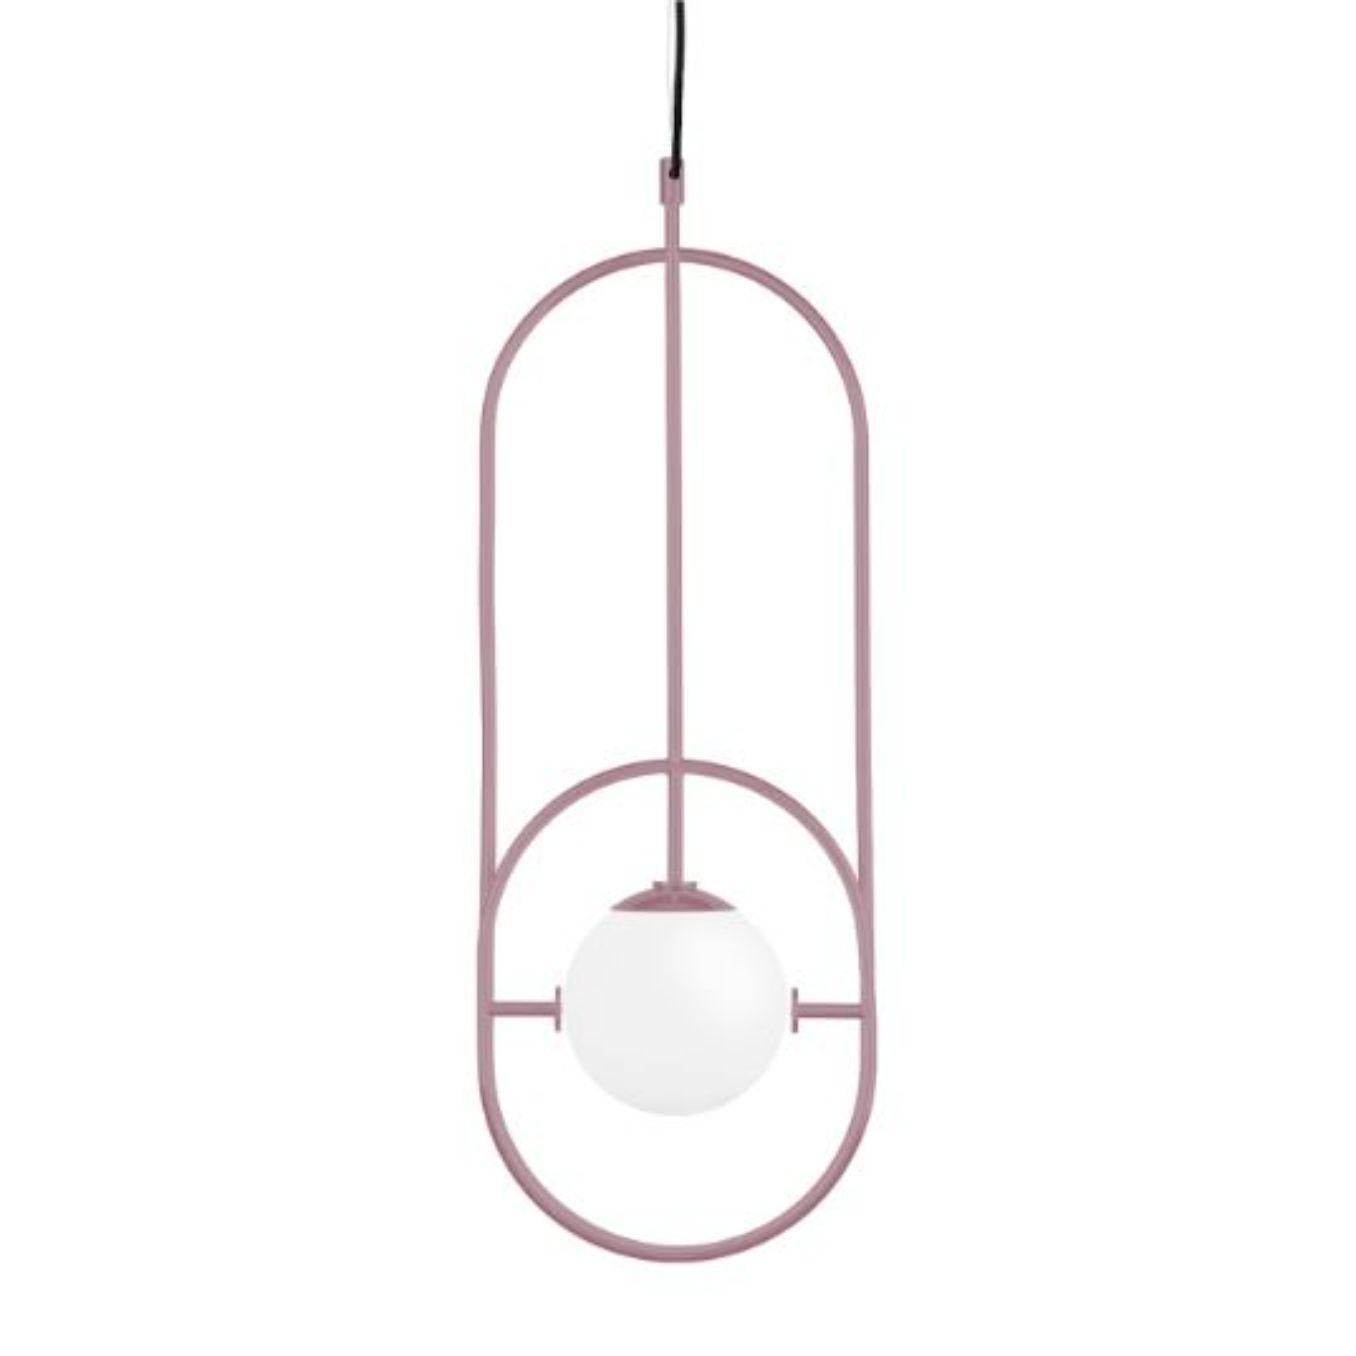 Lilac Loop I suspension lamp by Dooq
Dimensions: W 26.5 x D 15 x H 73 cm
Materials: lacquered metal, polished or brushed metal.
Also available in different colours and materials.

Information:
230V/50Hz
1 x max. G9
4W LED

120V/60Hz
1 x